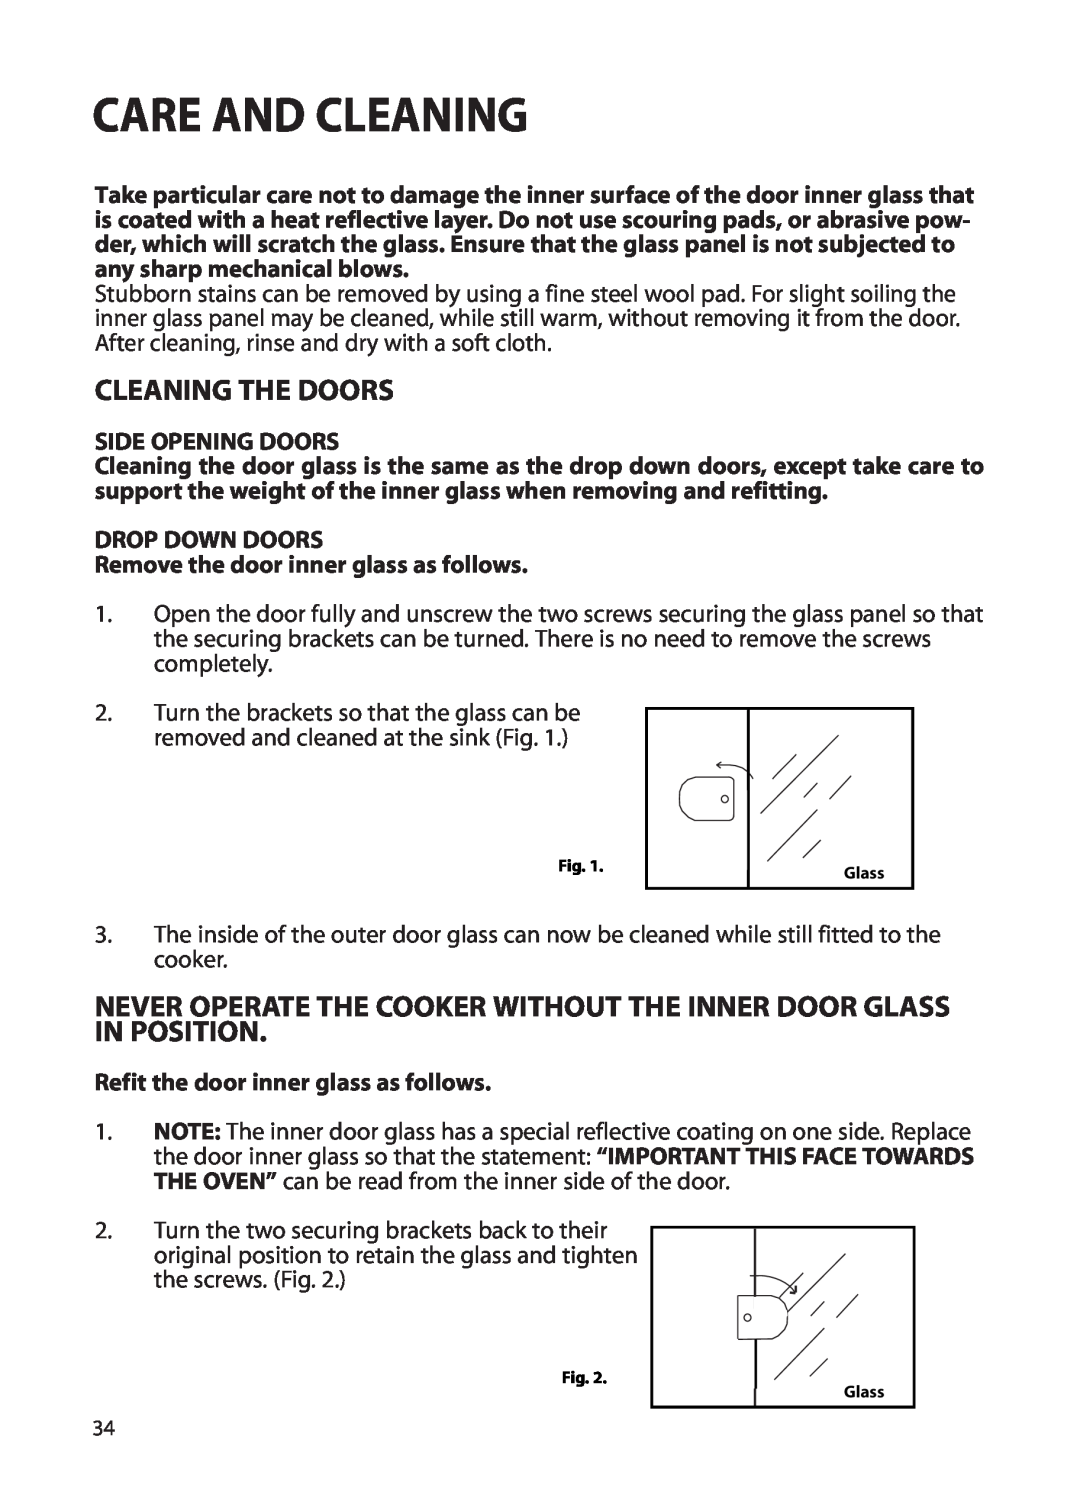 Hotpoint BS72 Care And Cleaning, Cleaning The Doors, Never Operate The Cooker Without The Inner Door Glass In Position 